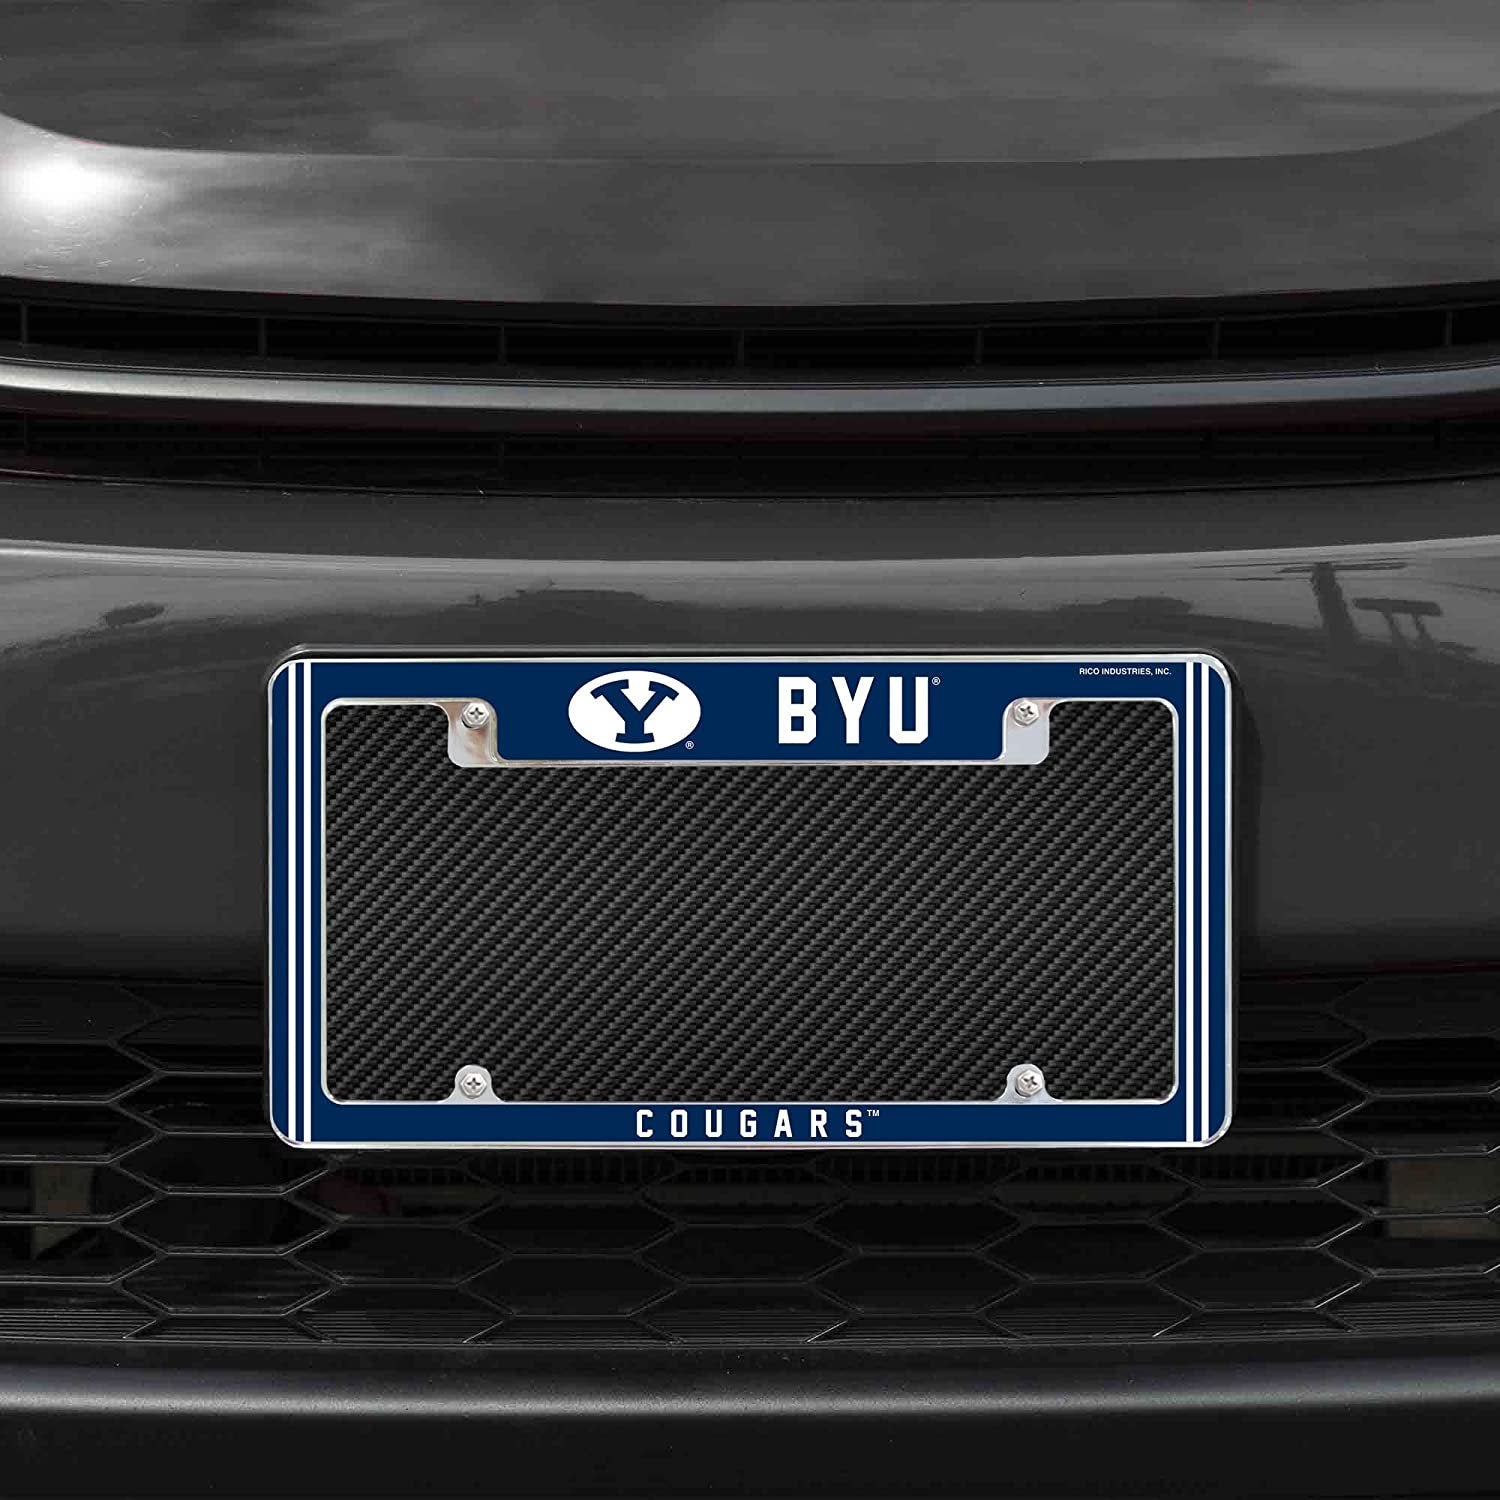 Brigham Young Cougars BYU Metal License Plate Frame Chrome Tag Cover Alternate Design 6x12 Inch